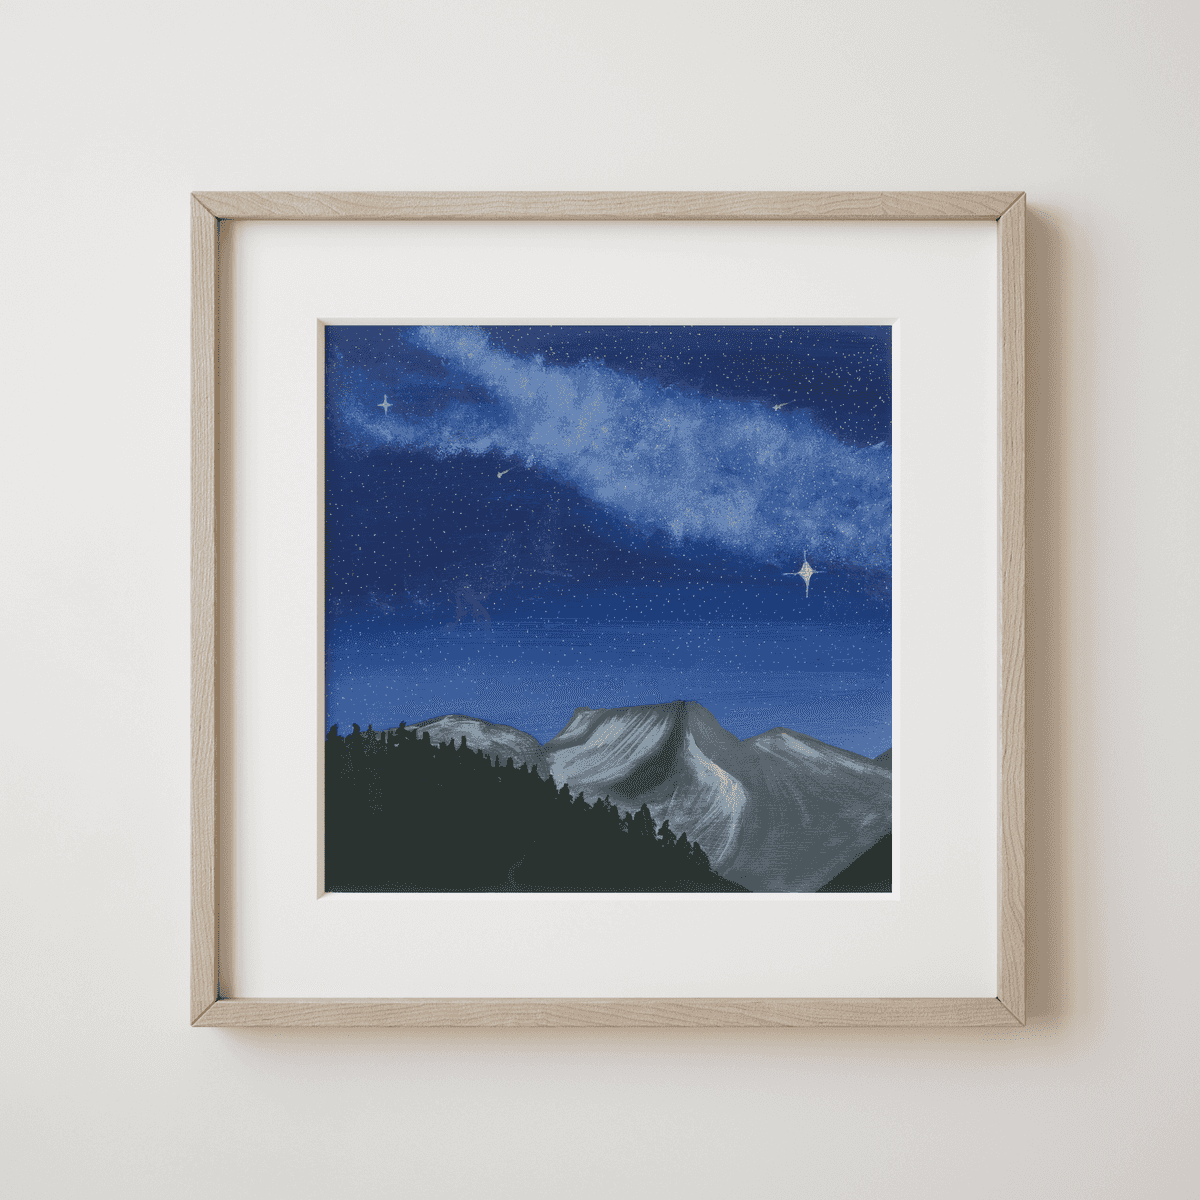 A Night with Grey Wolves - Cosmic Veil over the Silent Mountains and Pine Forest Fine Art Print - nature soundscape art - earth.fm